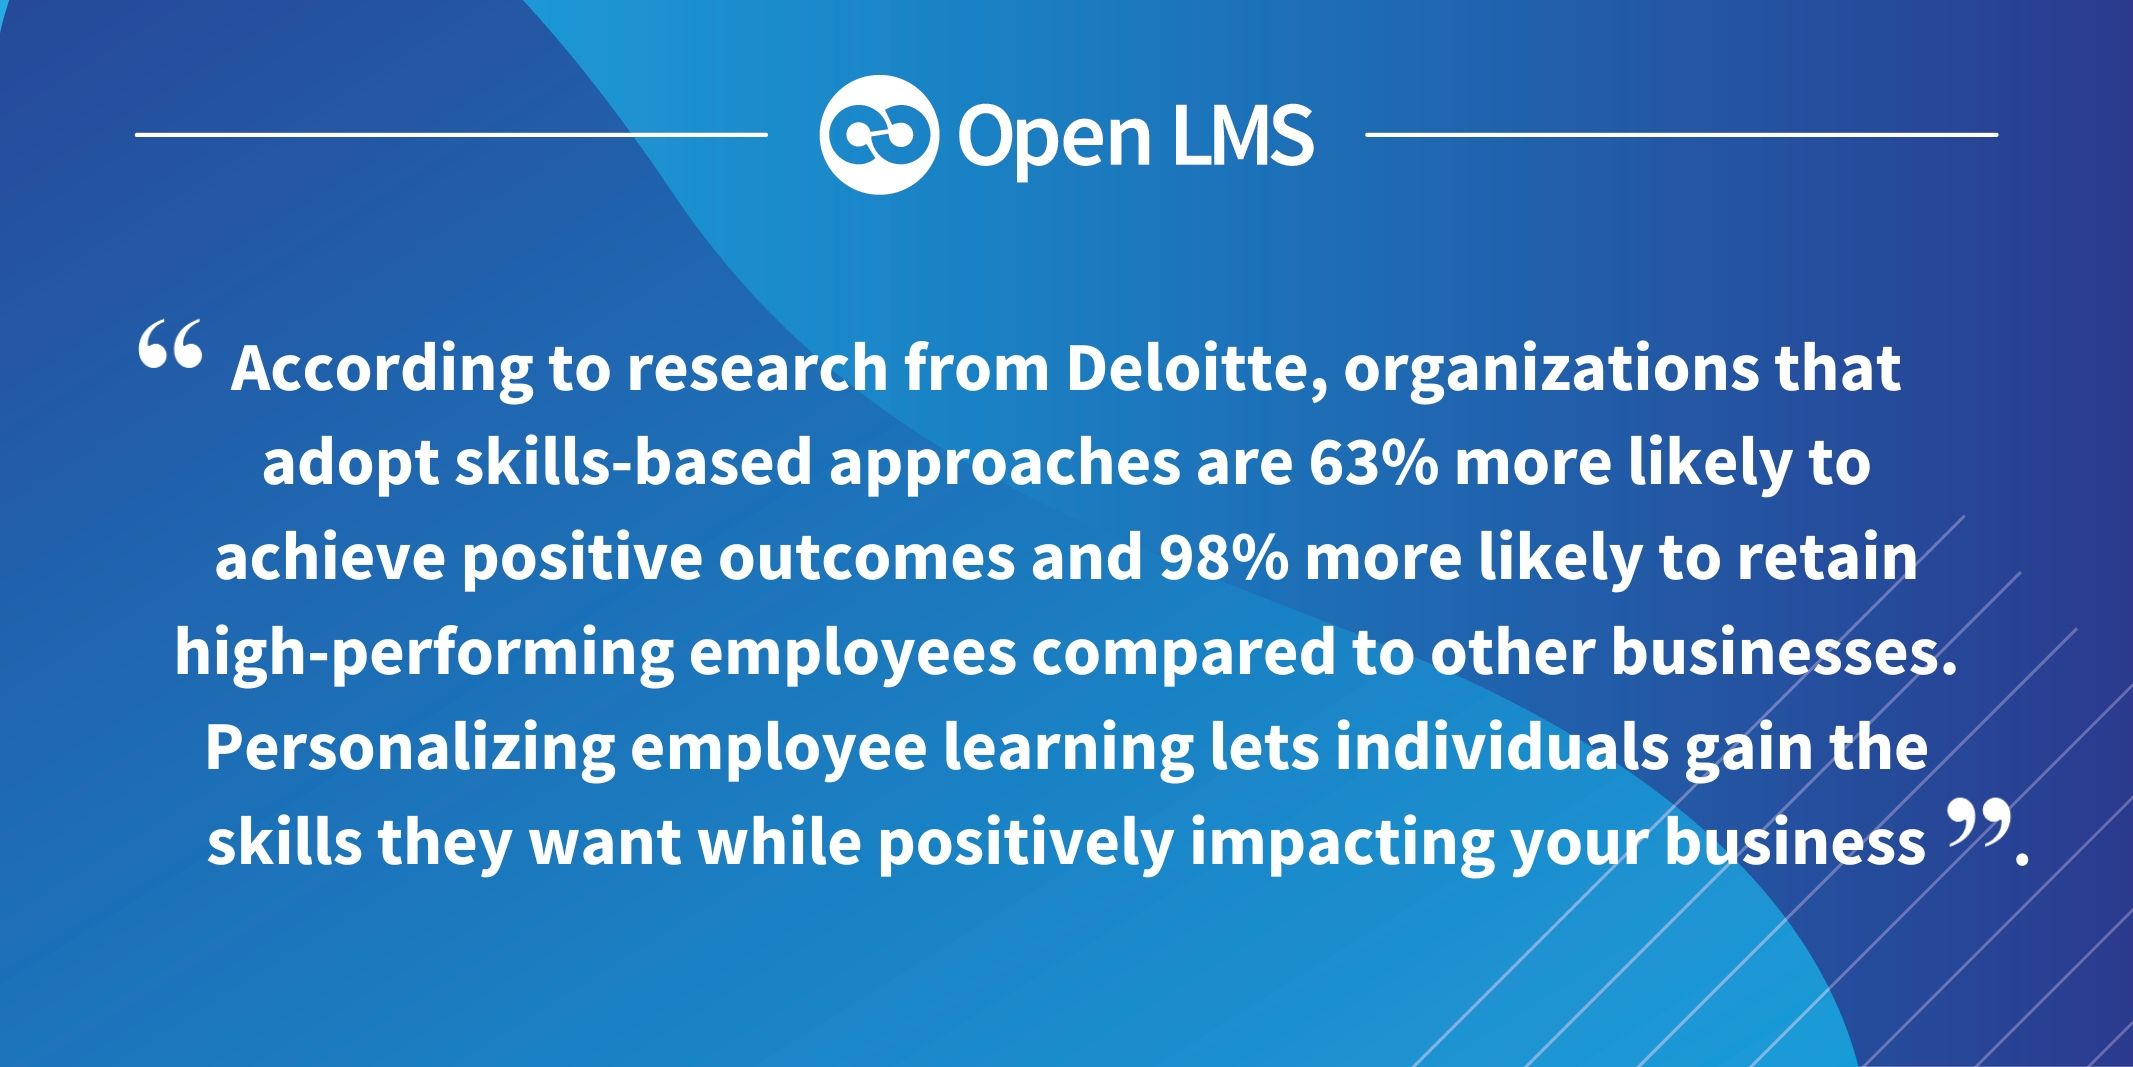 According to research from Deloitte, organizations that adopt skills-based approaches are 63% more likely to achieve positive outcomes and 98% more likely to retain high-performing employees compared to other businesses. Personalizing employee learning lets individuals gain the skills they want while positively impacting your business